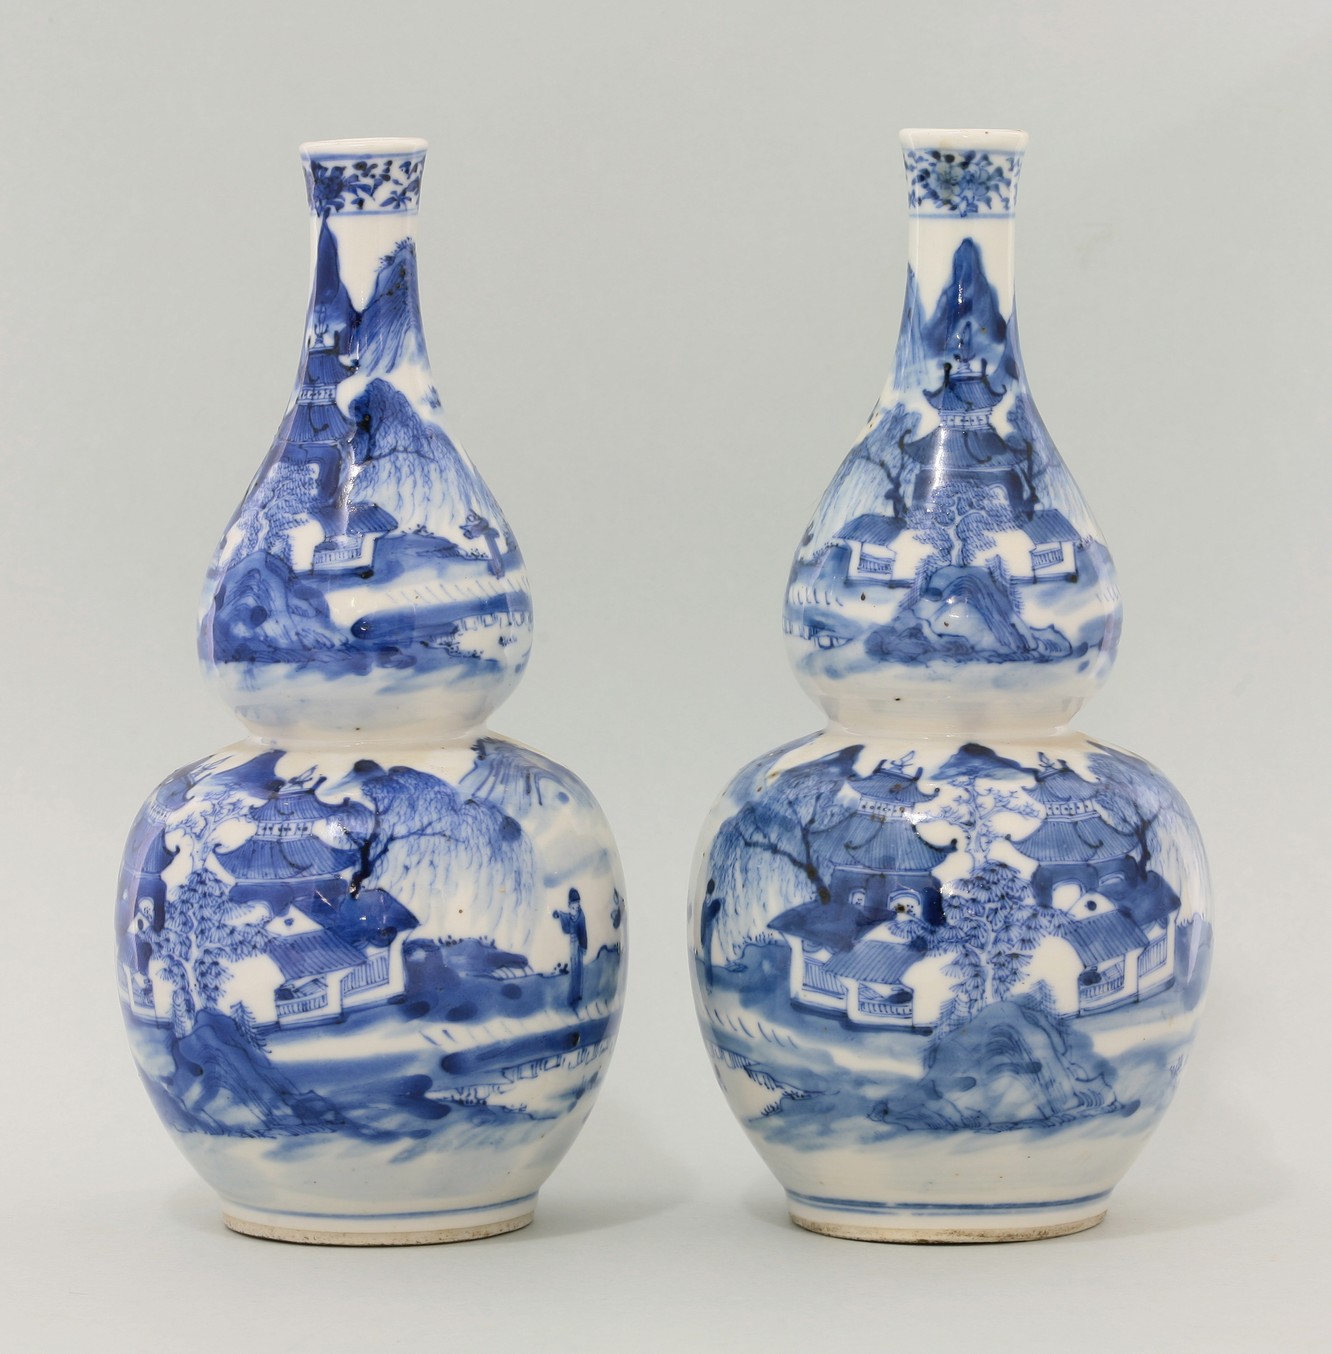 A pair of blue and white double-gourd Vases,
c.1880, each painted with pagodas and figures in a